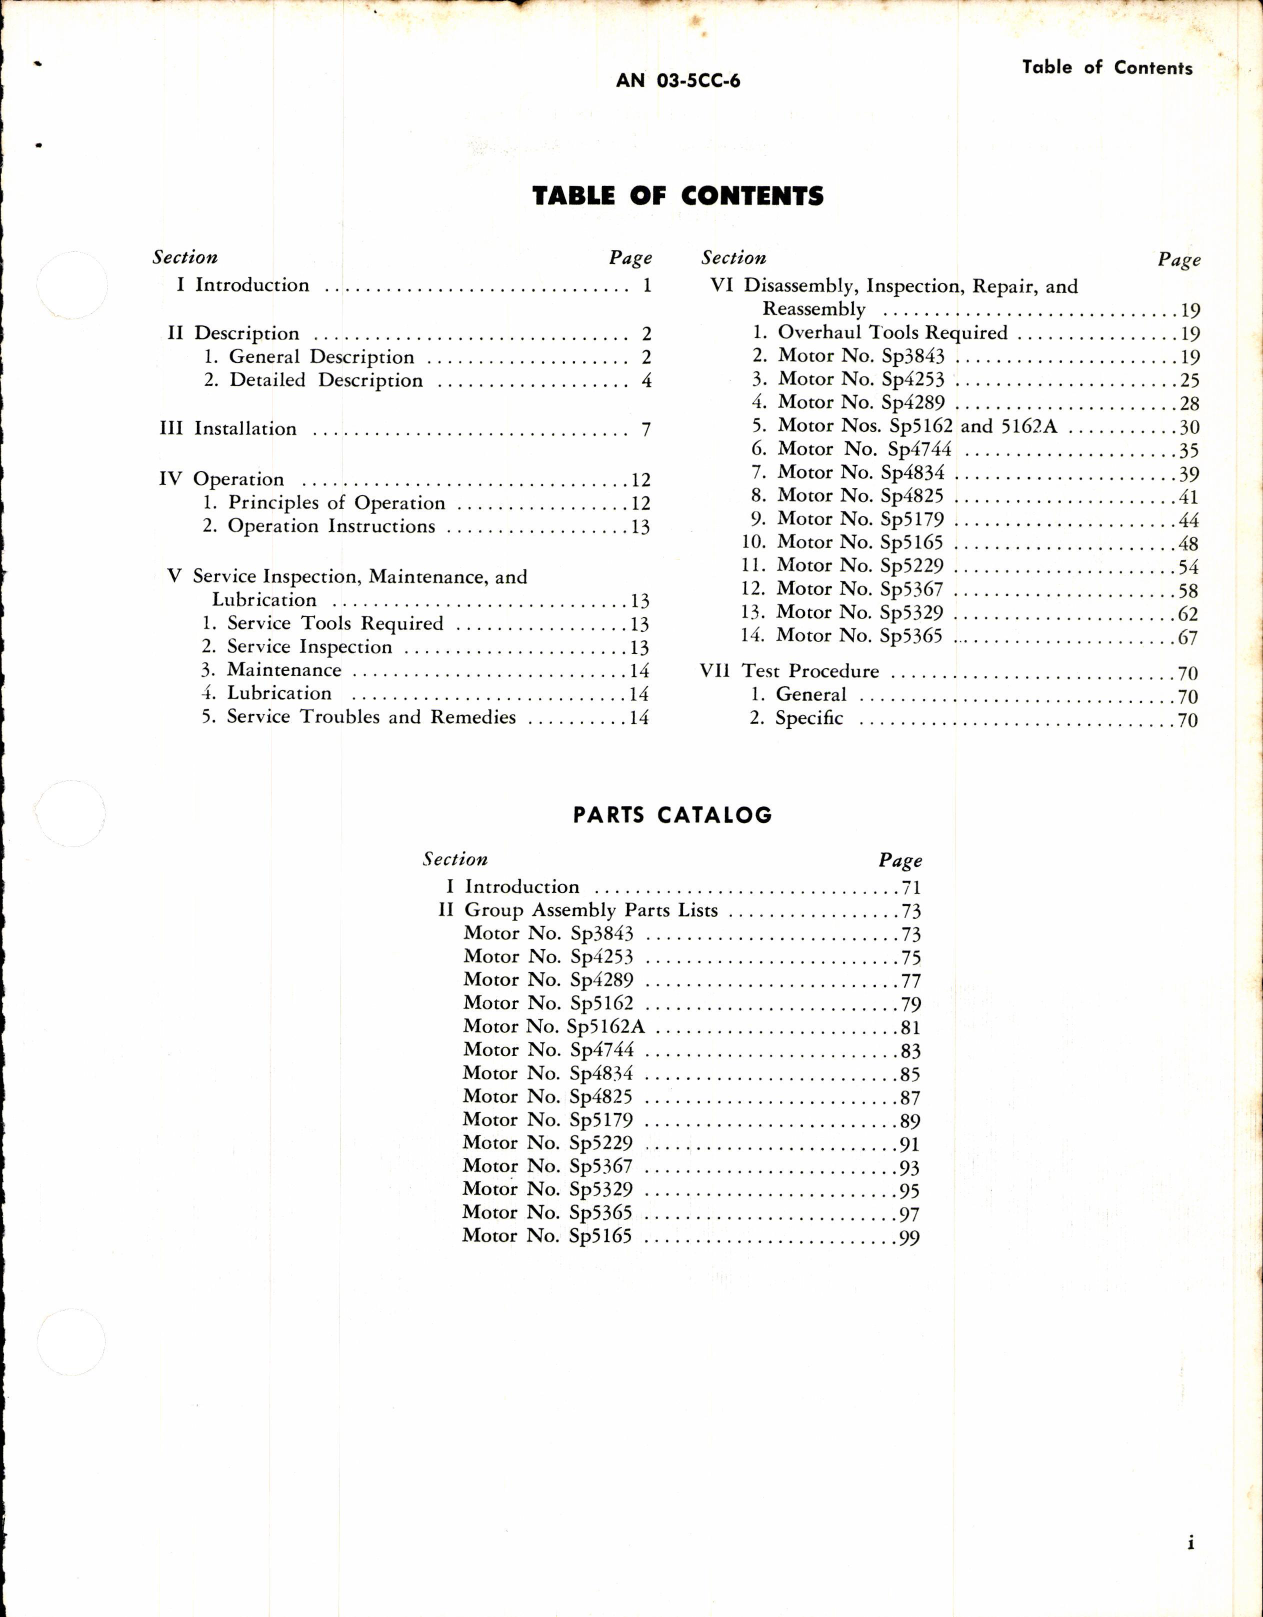 Sample page 3 from AirCorps Library document: Operation, Service, & Overhaul Instructions w/ Parts Catalog for Fractional Horsepower Electrical Motors 